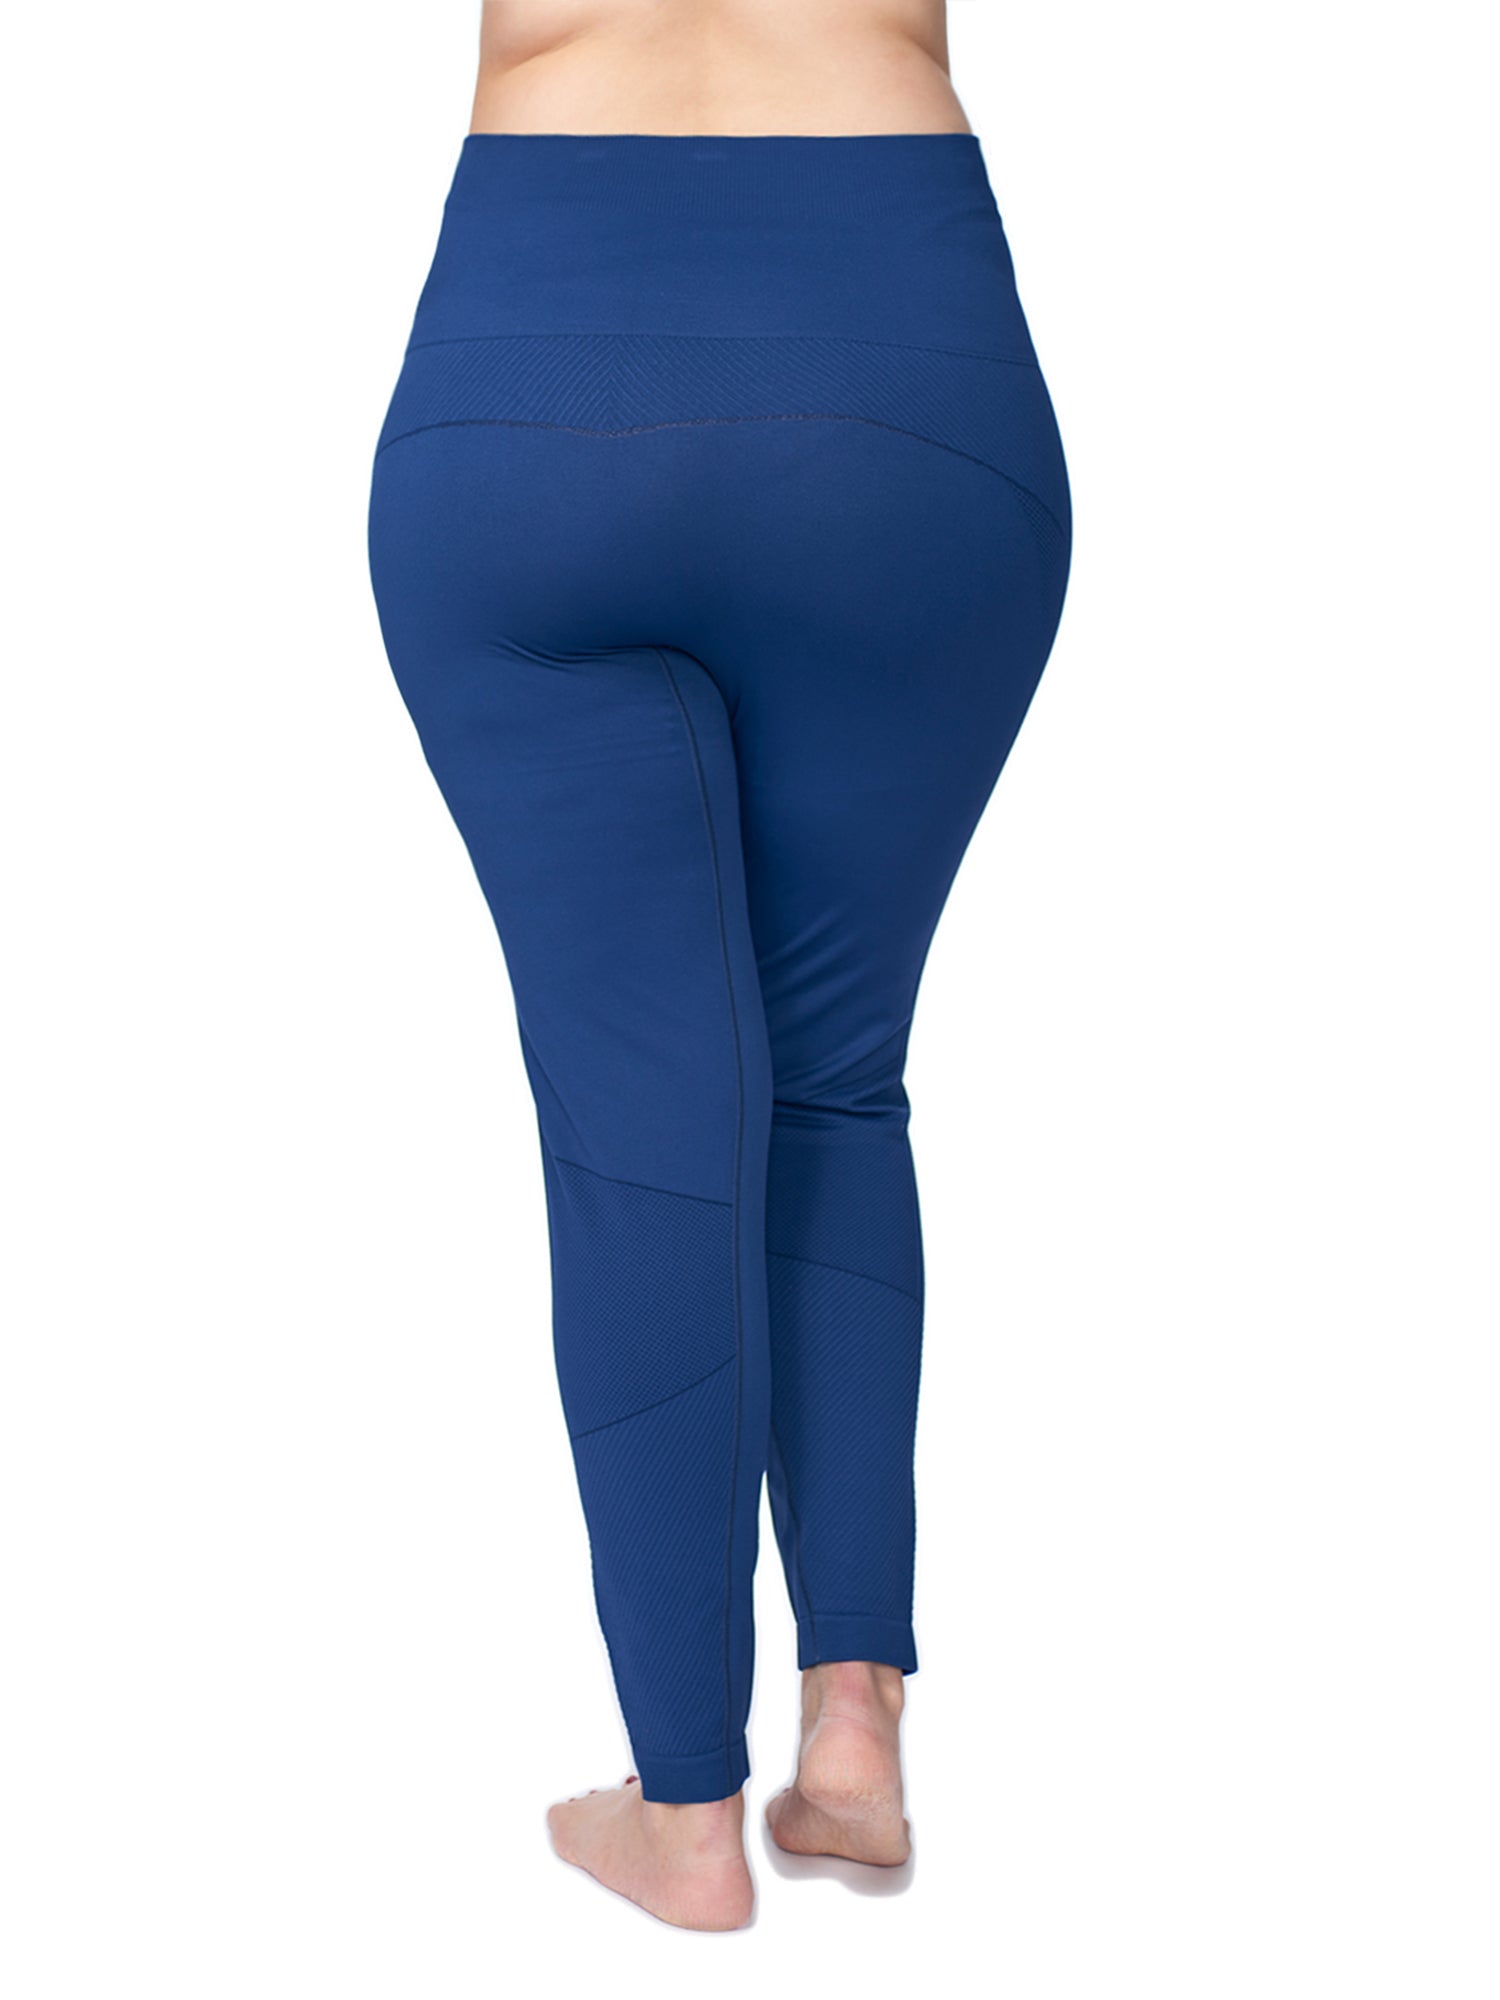 Women's Plus Active Seamless High Impact Fitness Legging with Stretch Compression in Twilight